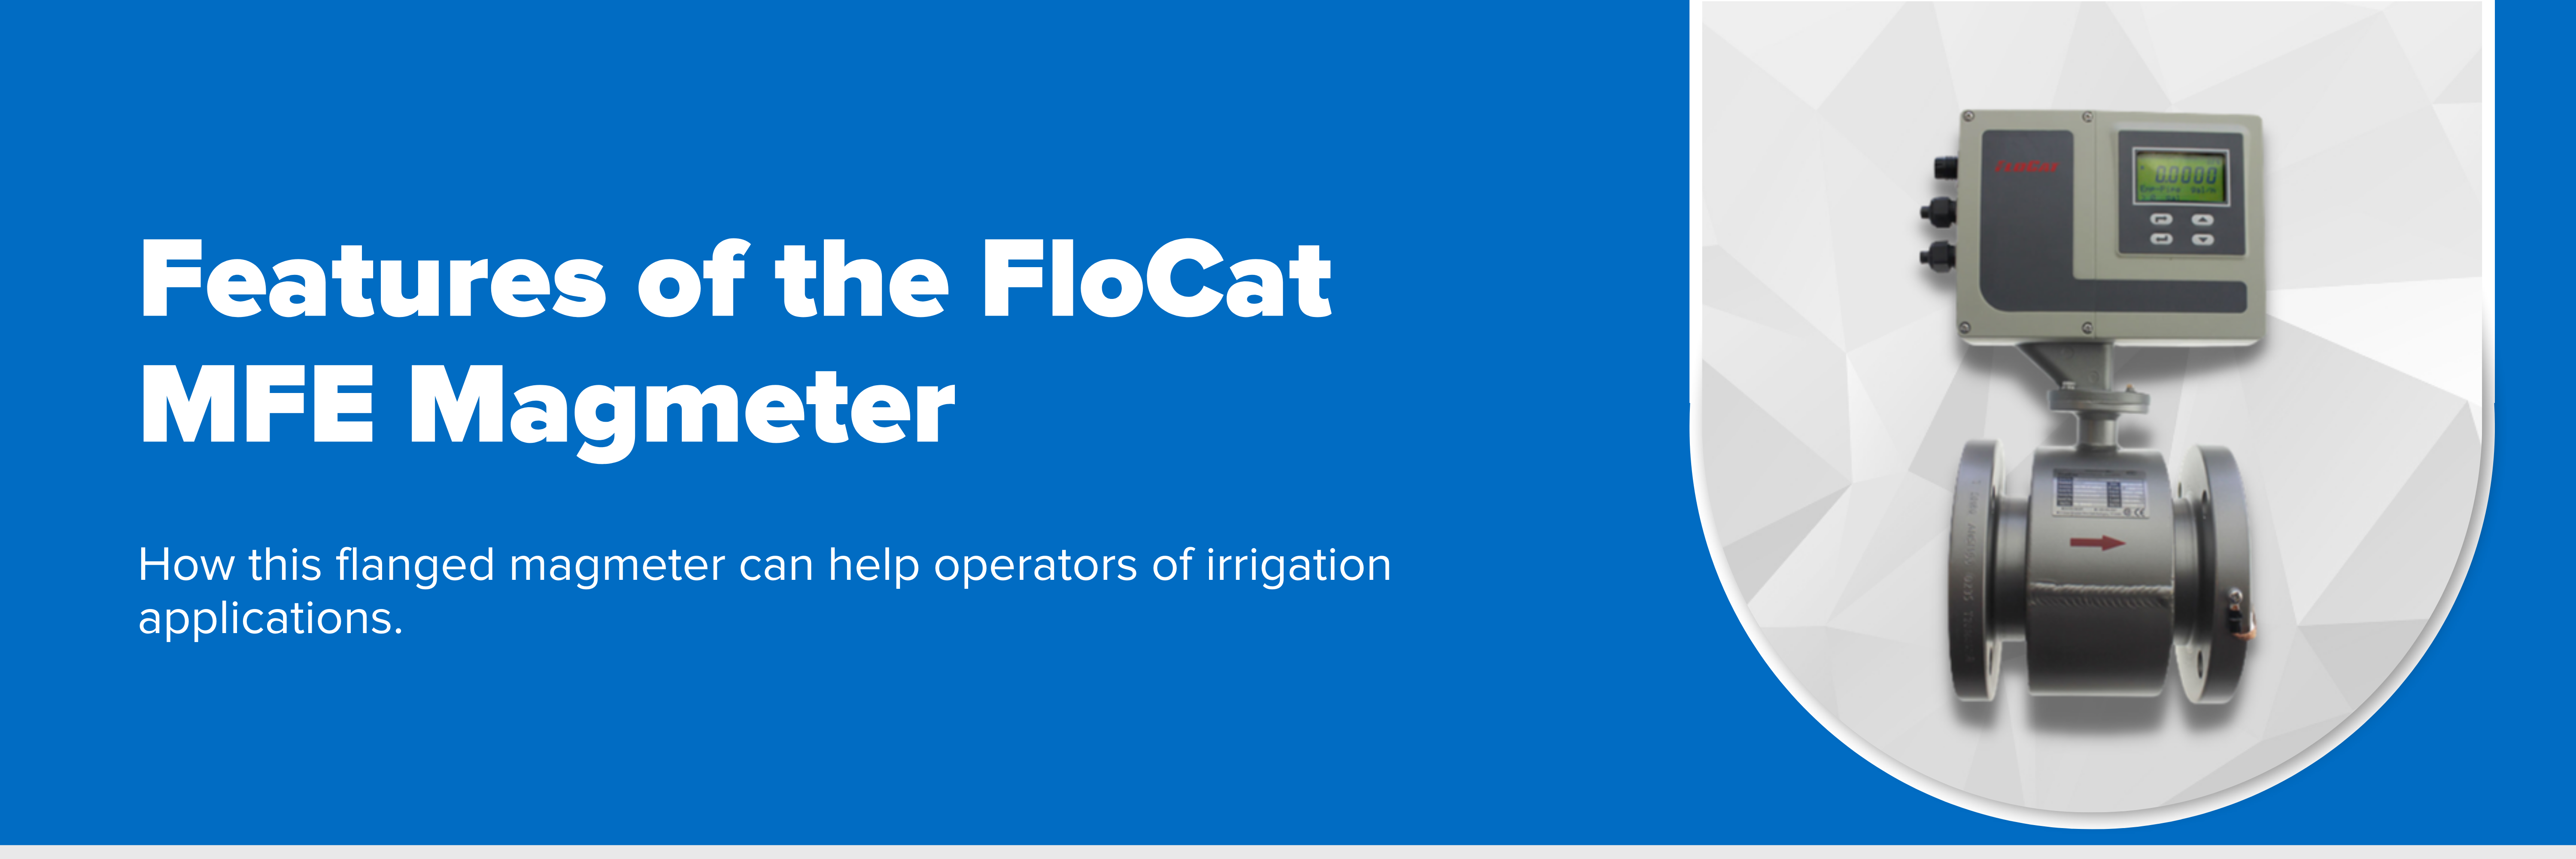 Header image with text "Features of the FloCat MFE Magmeter"